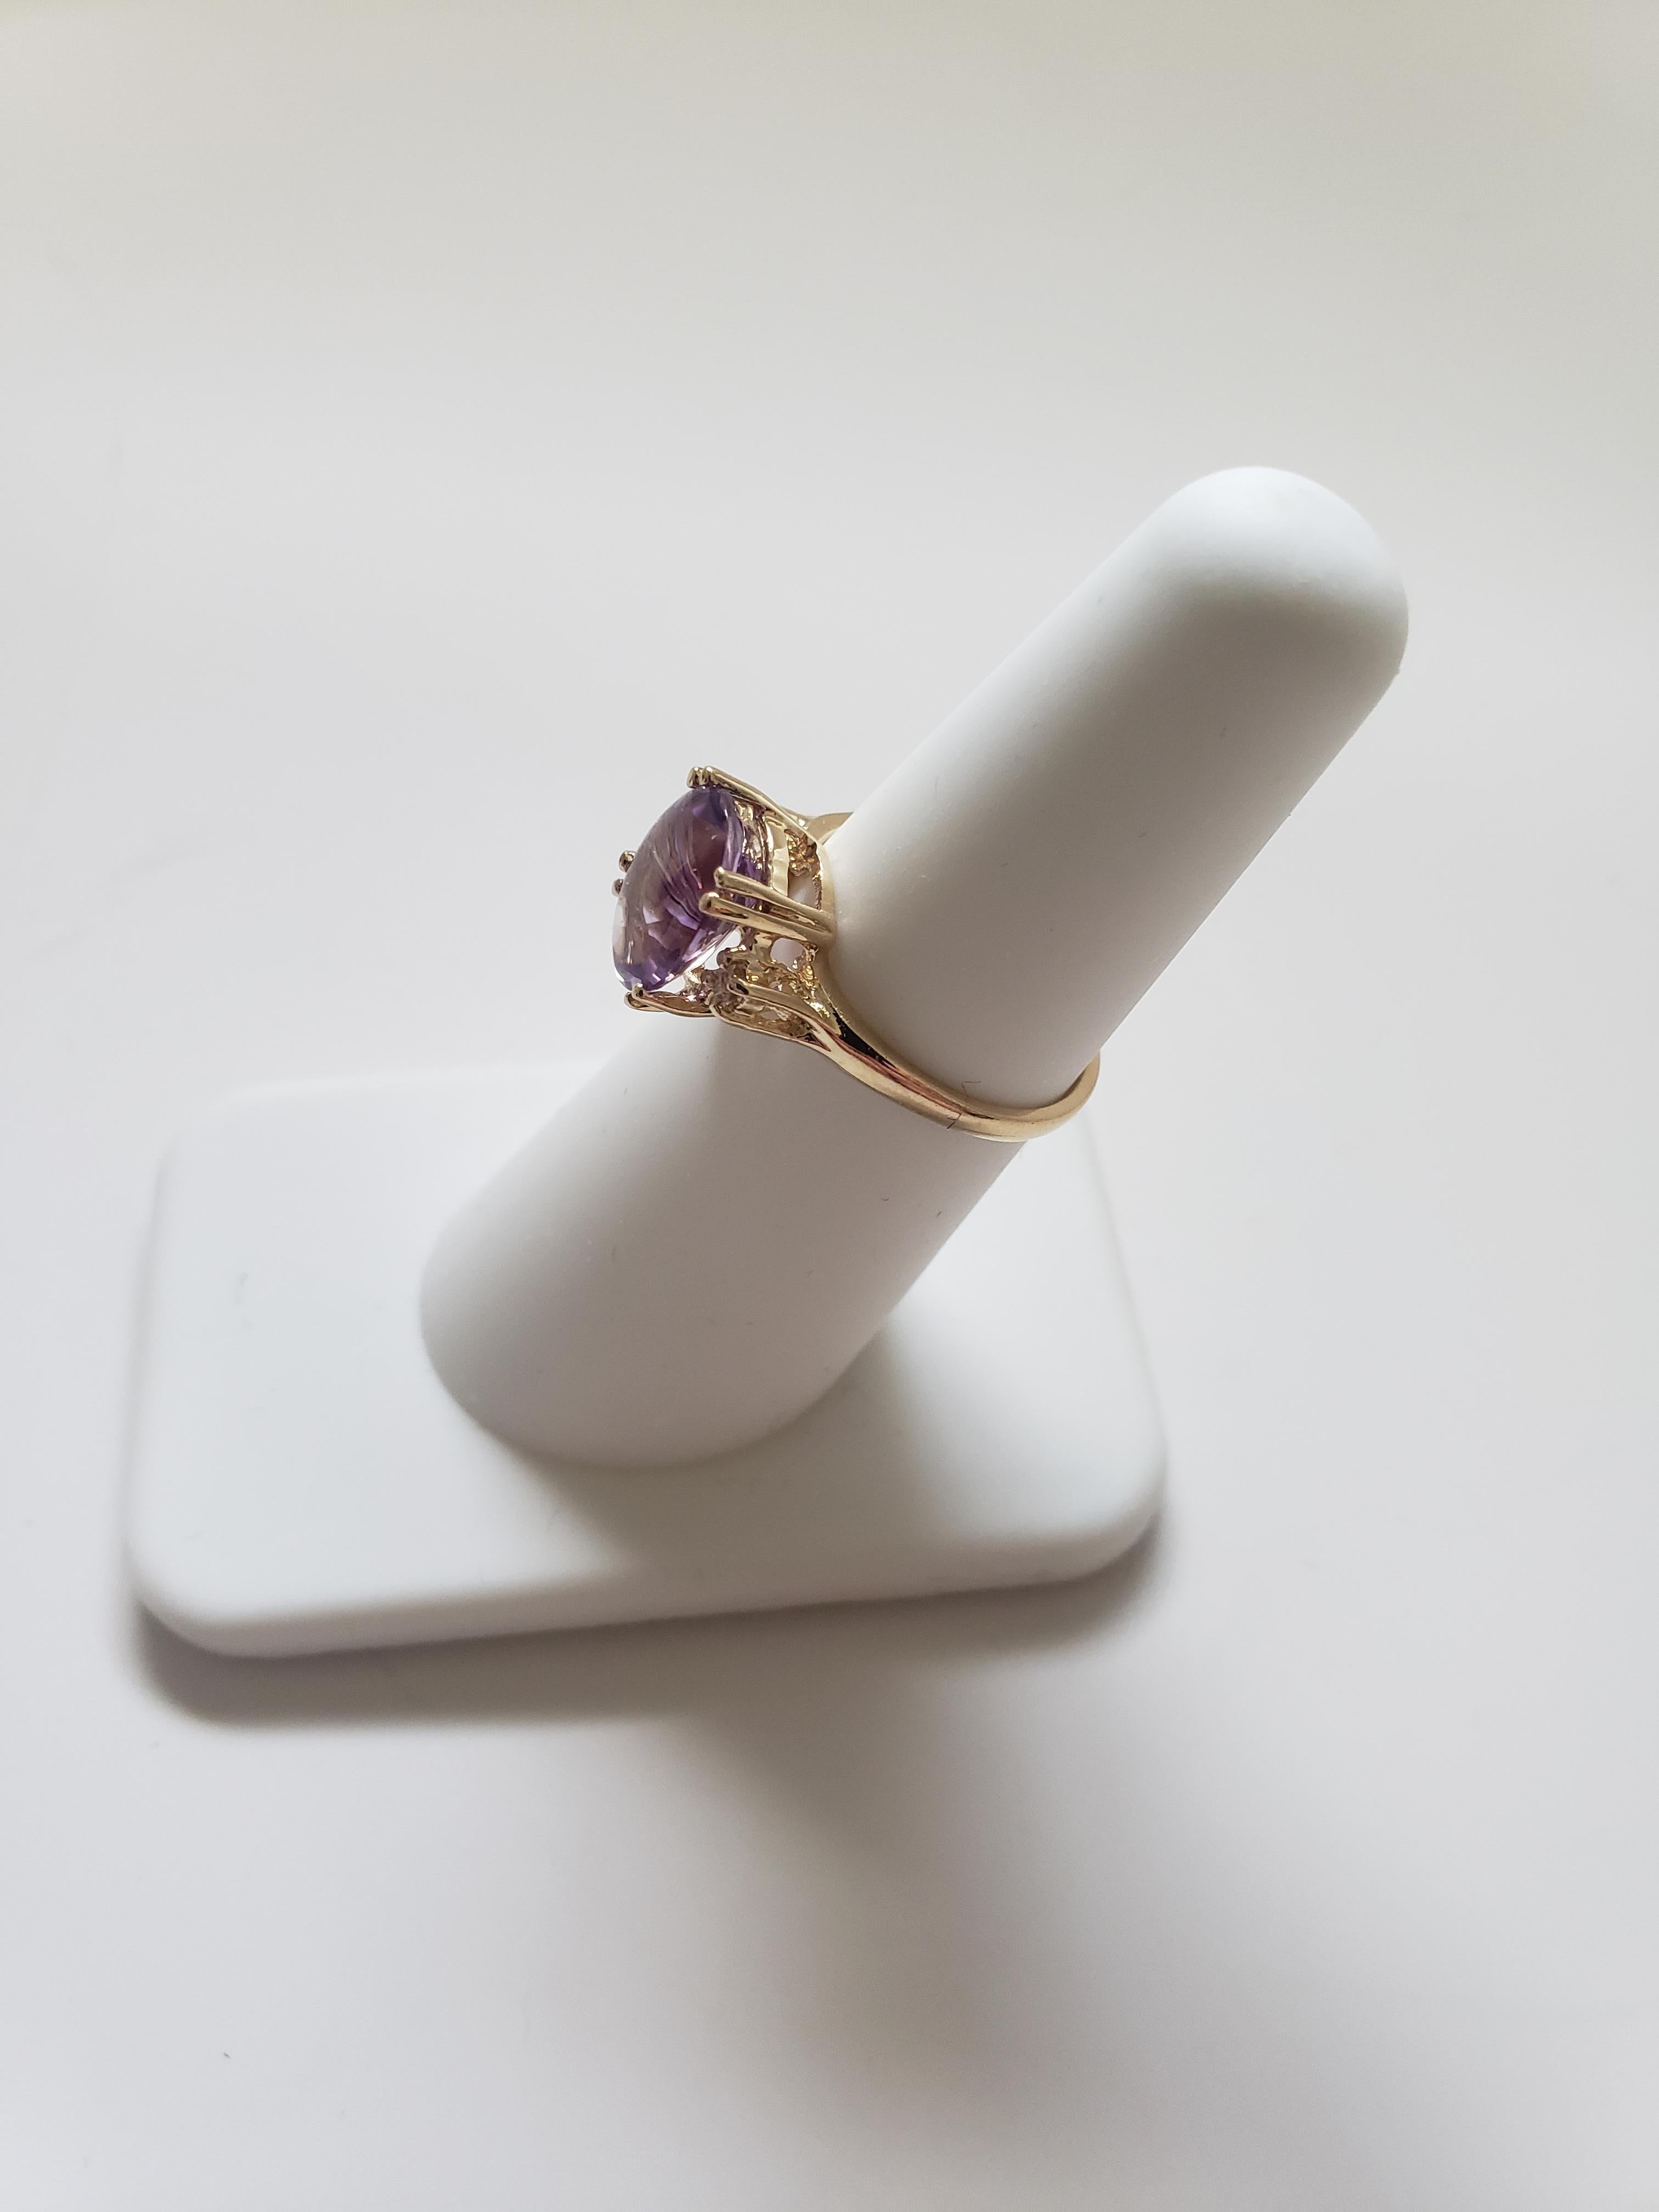 This exquisite ring is a stunning piece of jewelry that is perfect for any occasion. Crafted from 14k solid yellow gold, it features a Natural 2 CT
Brazilian AAAA Quality VVS Clarity amethyst fantasy cut stone that sparkles with intense purple hues.